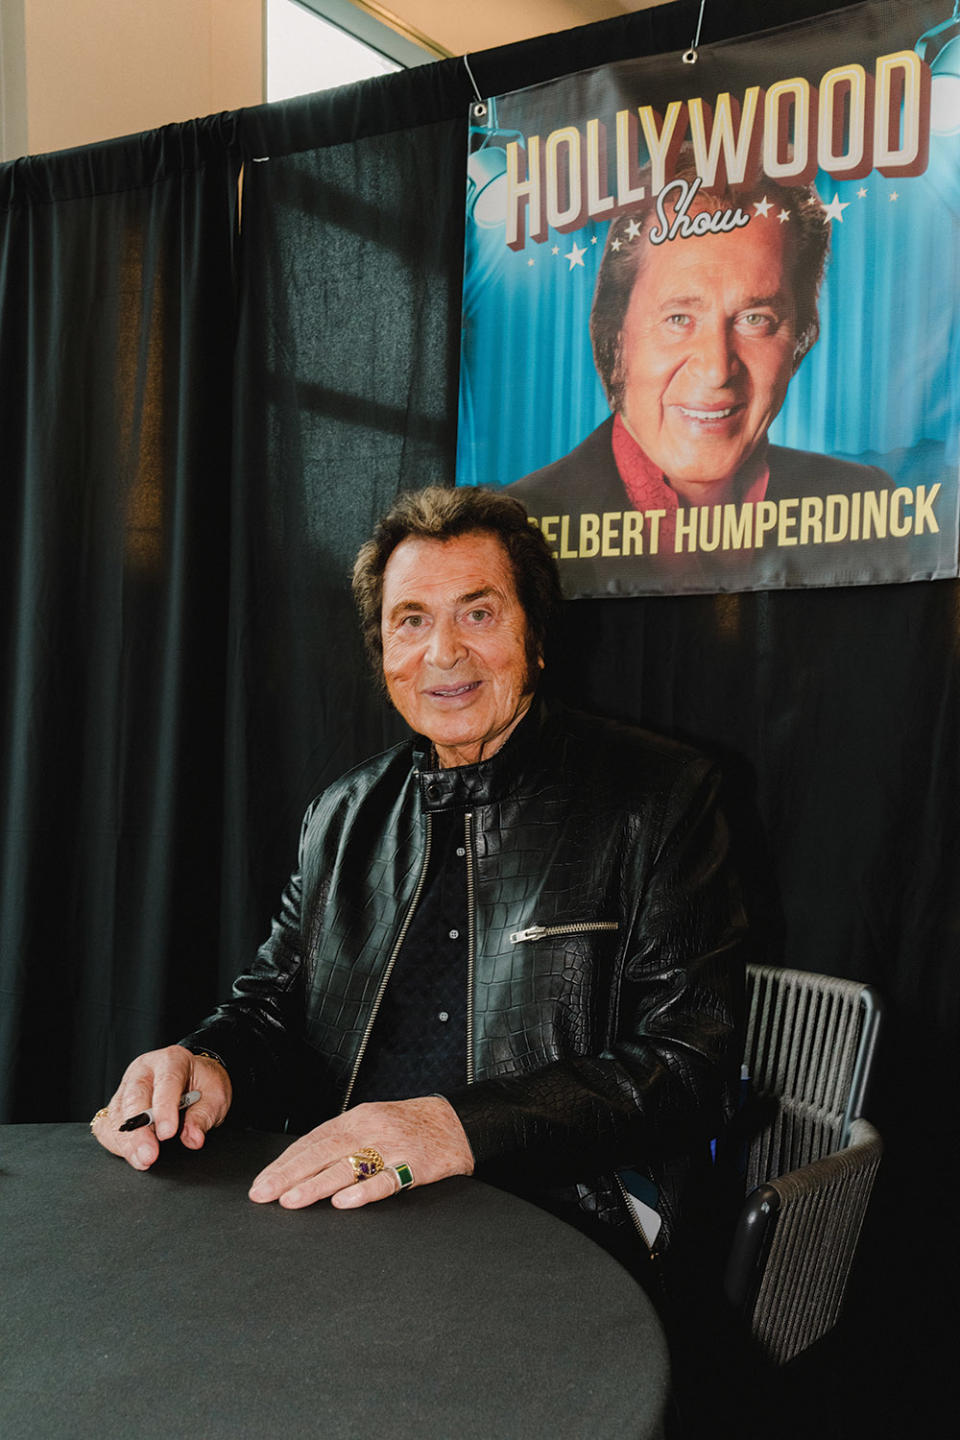 Singer Engelbert Humperdinck, 87, has one fan who has returned for autographs close to 30 times.